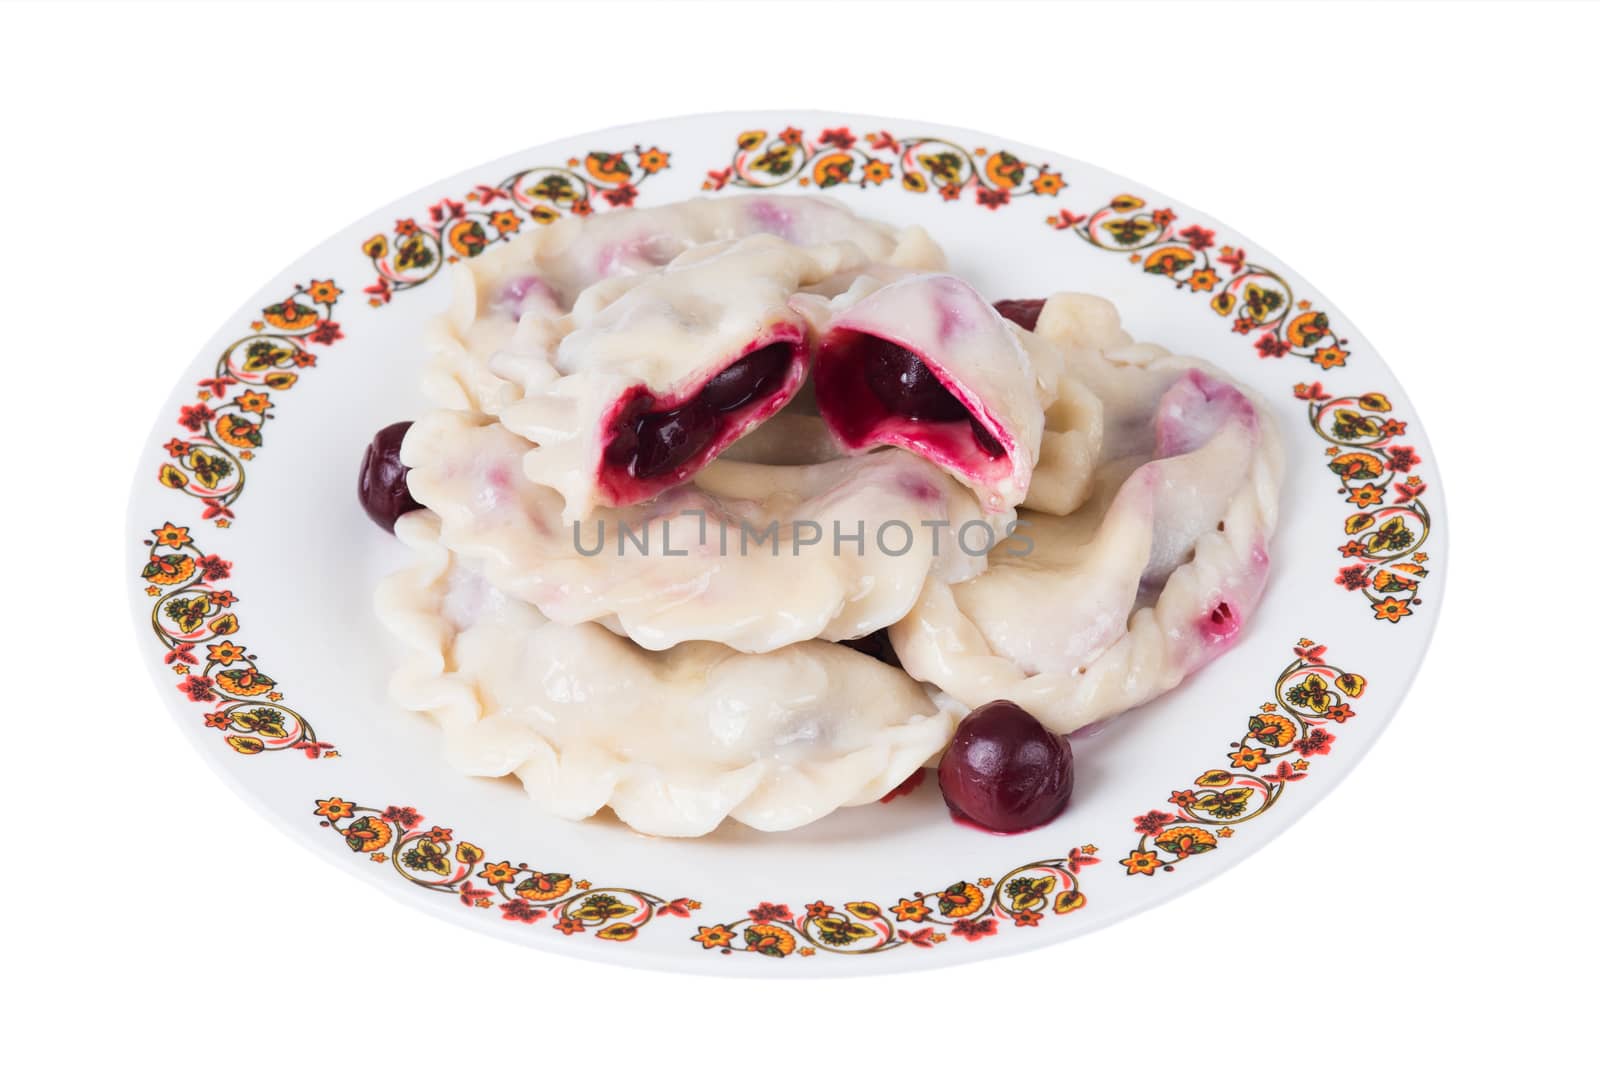 Ukrainian dumplings with cherries on plate on white background, isolated